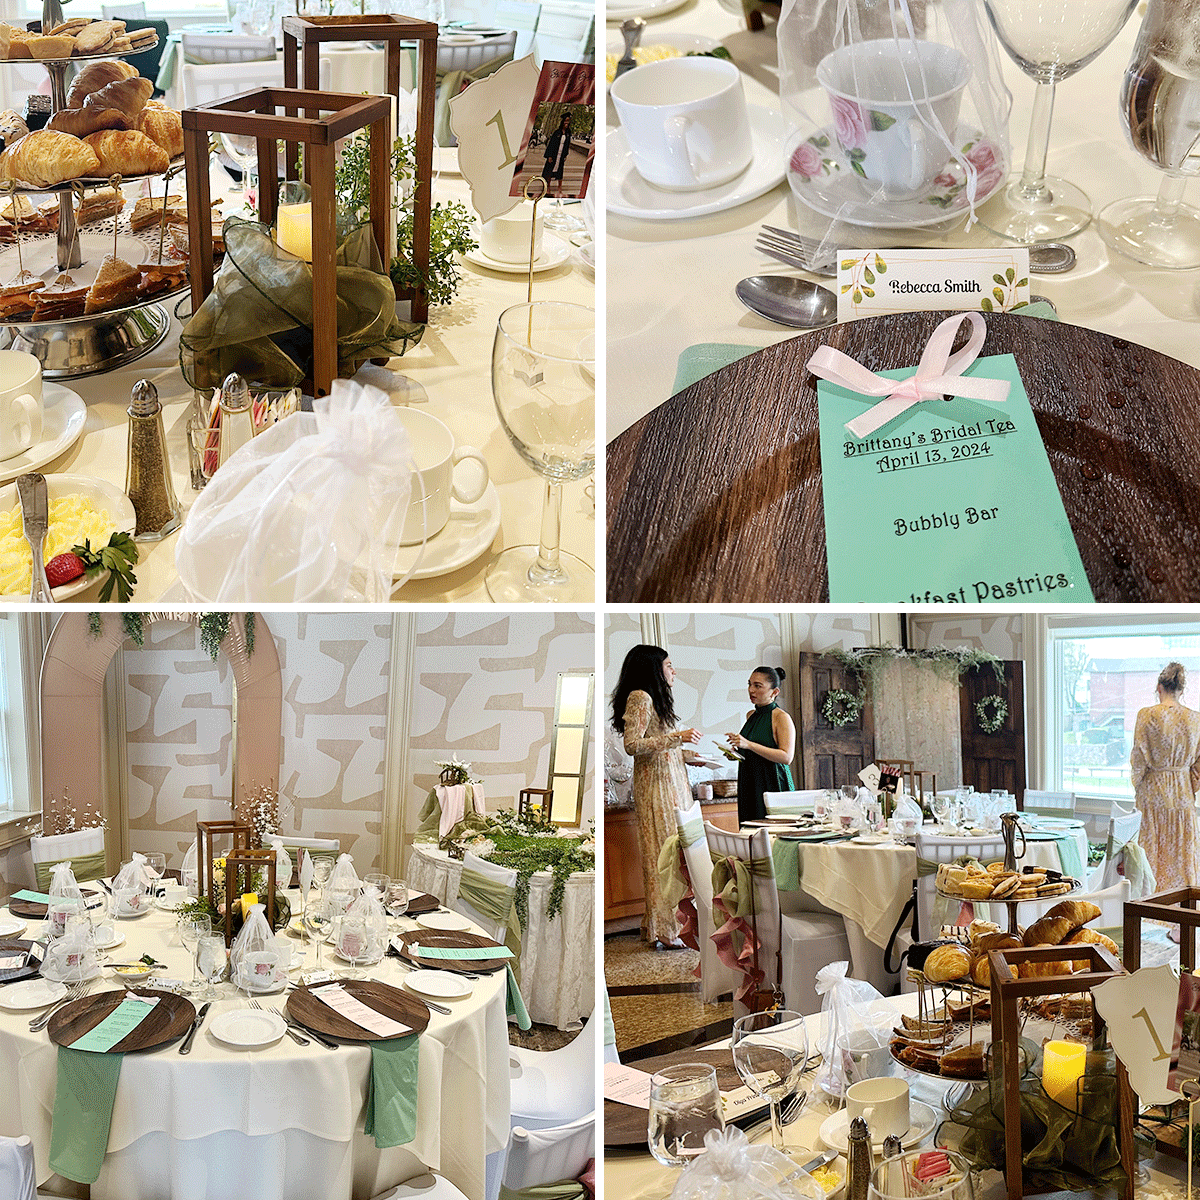 Baby Showers are a great place to show your creativity. Discover More Possibilities: watersedgeatgiovannis.com/baby-showers-w… #babyshowerideas #babyshowe #mommatobe #baby #ctbabyshower #creativebabyshower #ctpartyvenue #venuect